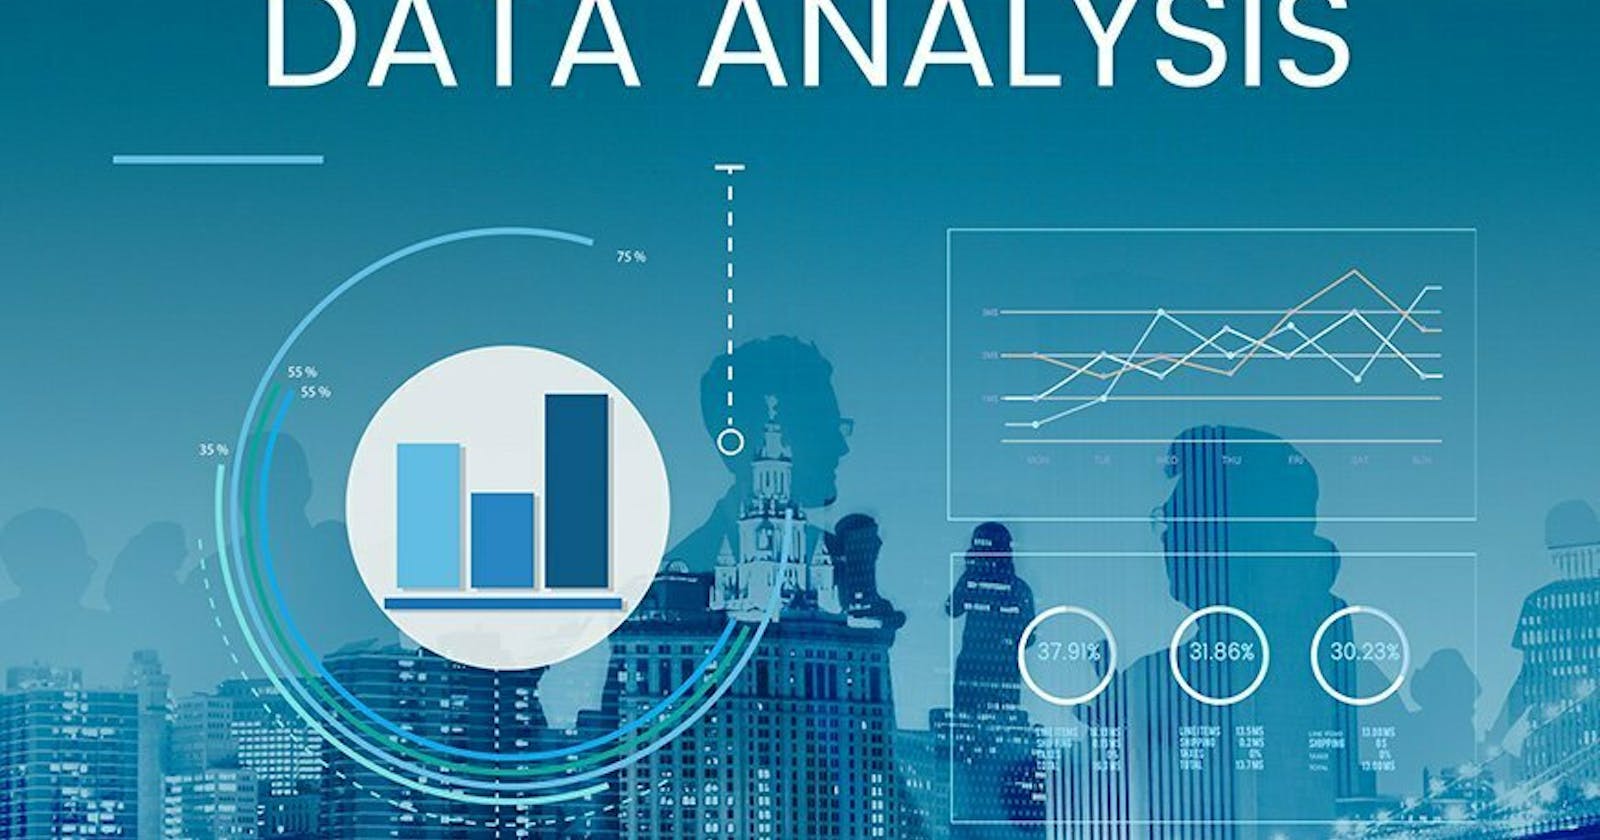 Charting Data Insights: An In-Depth Look at Our Data Analytics Training Program